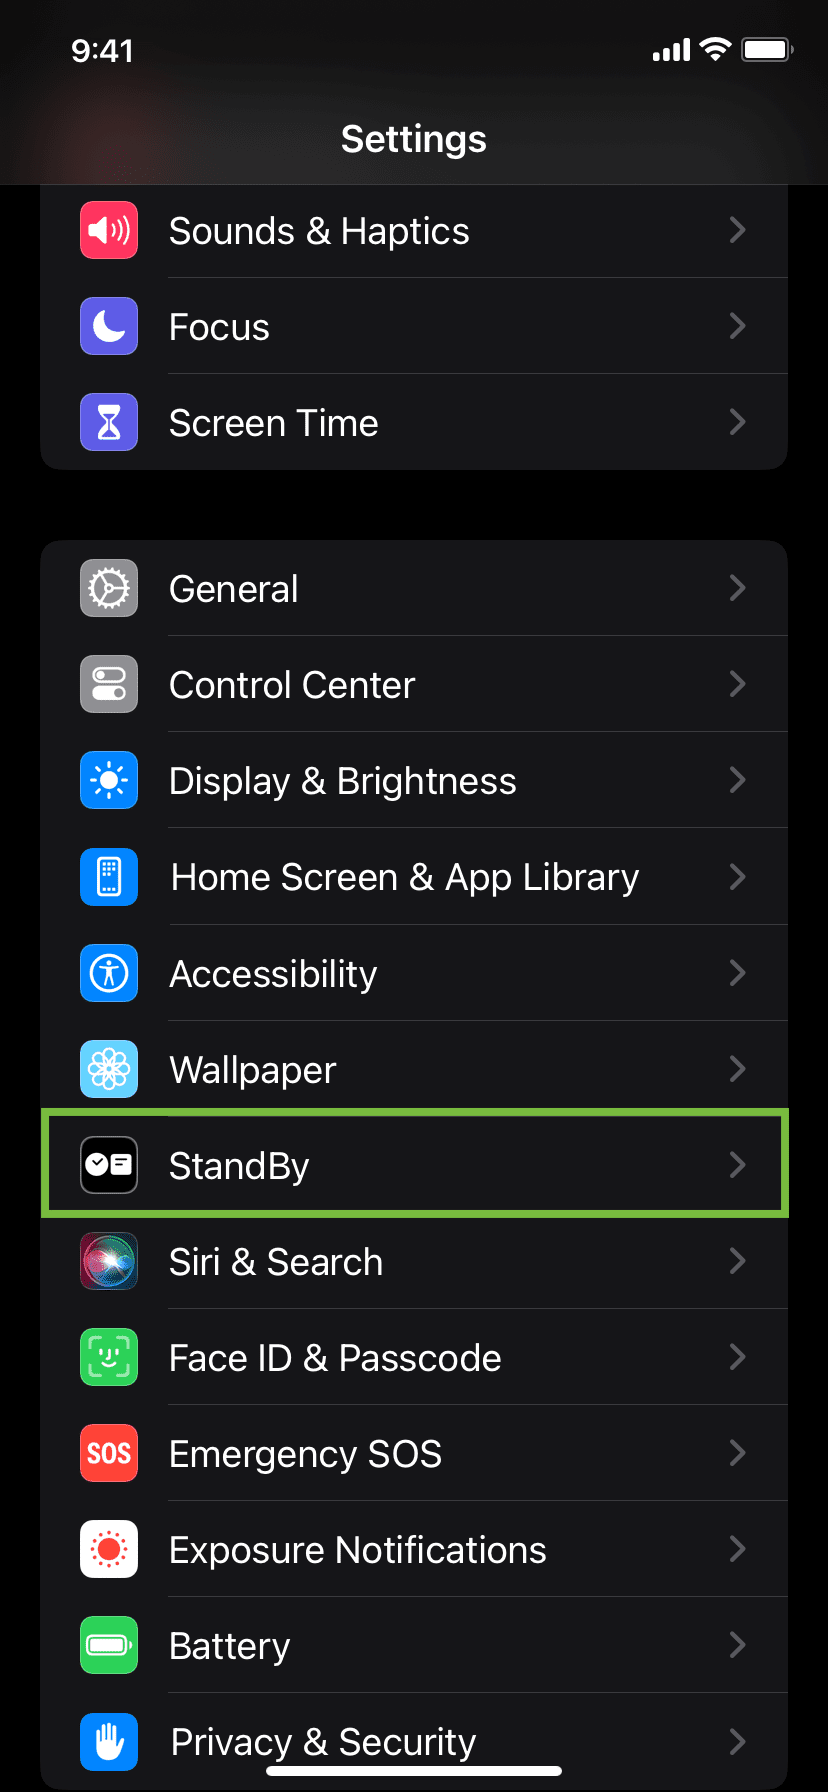 StandBy in iPhone Settings app